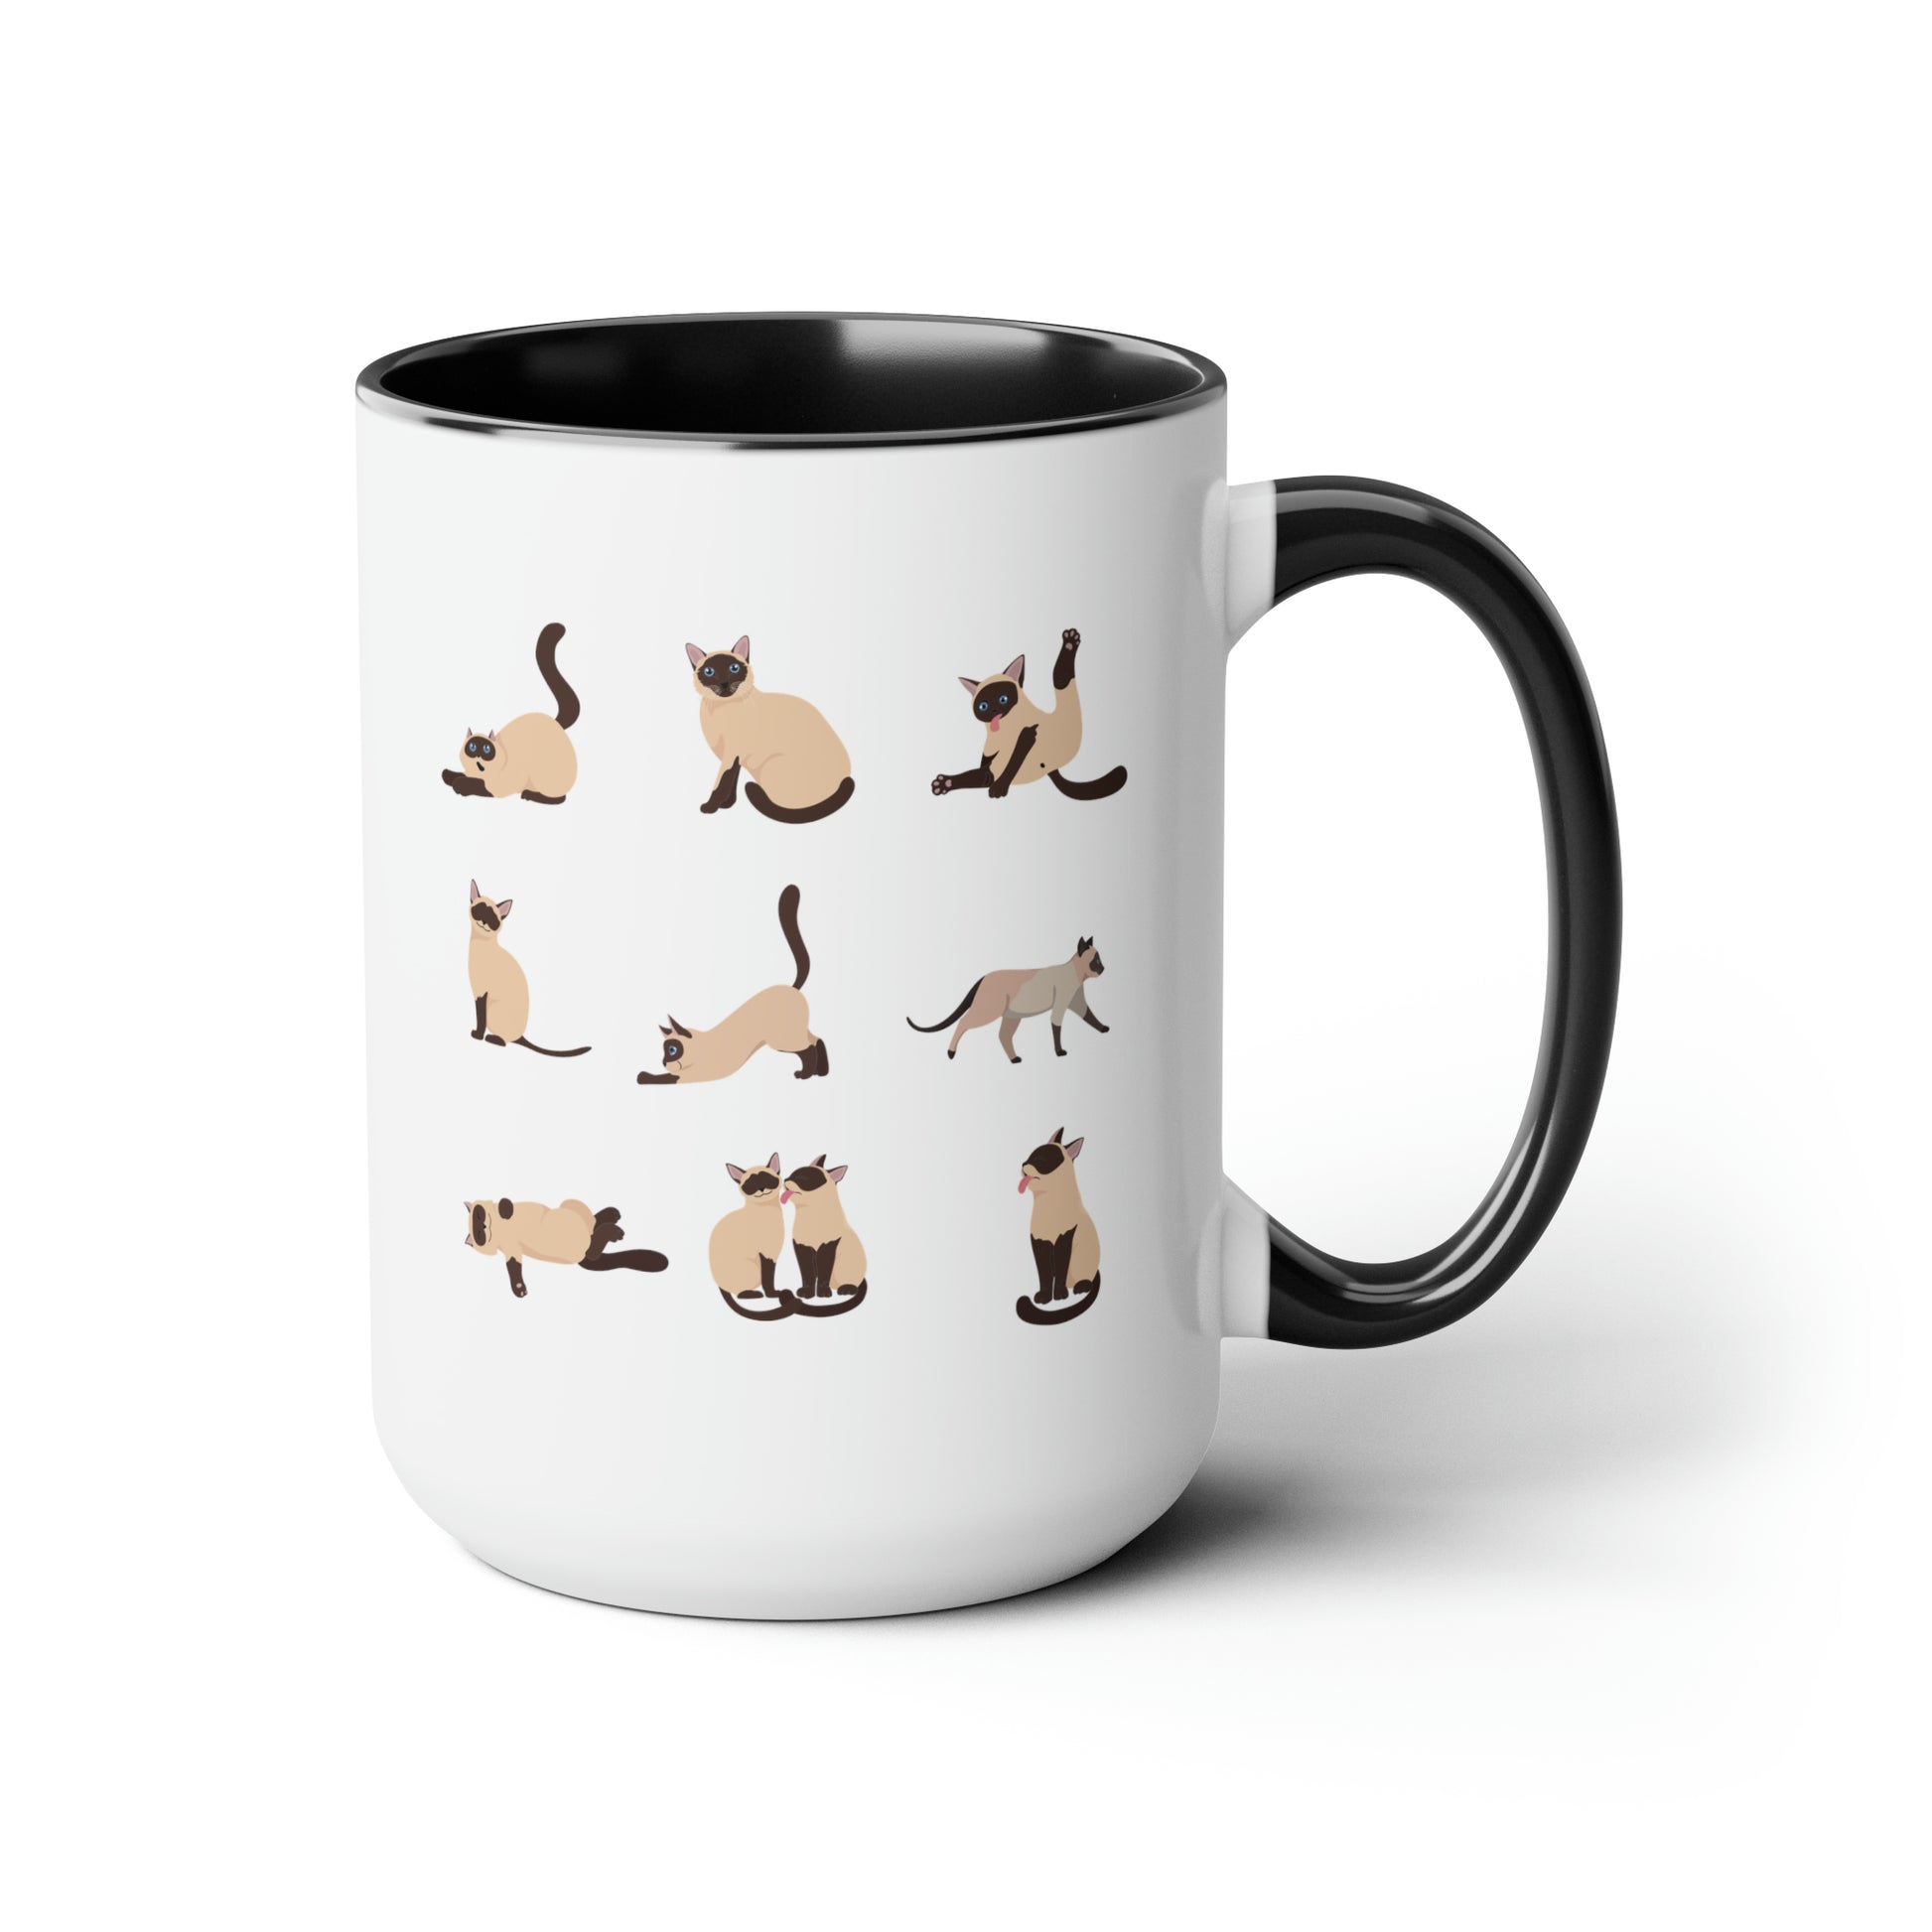 Siamese Cats 15oz white with black accent funny large coffee mug gift for cat mom cute kitten pet lover waveywares wavey wares wavywares wavy wares